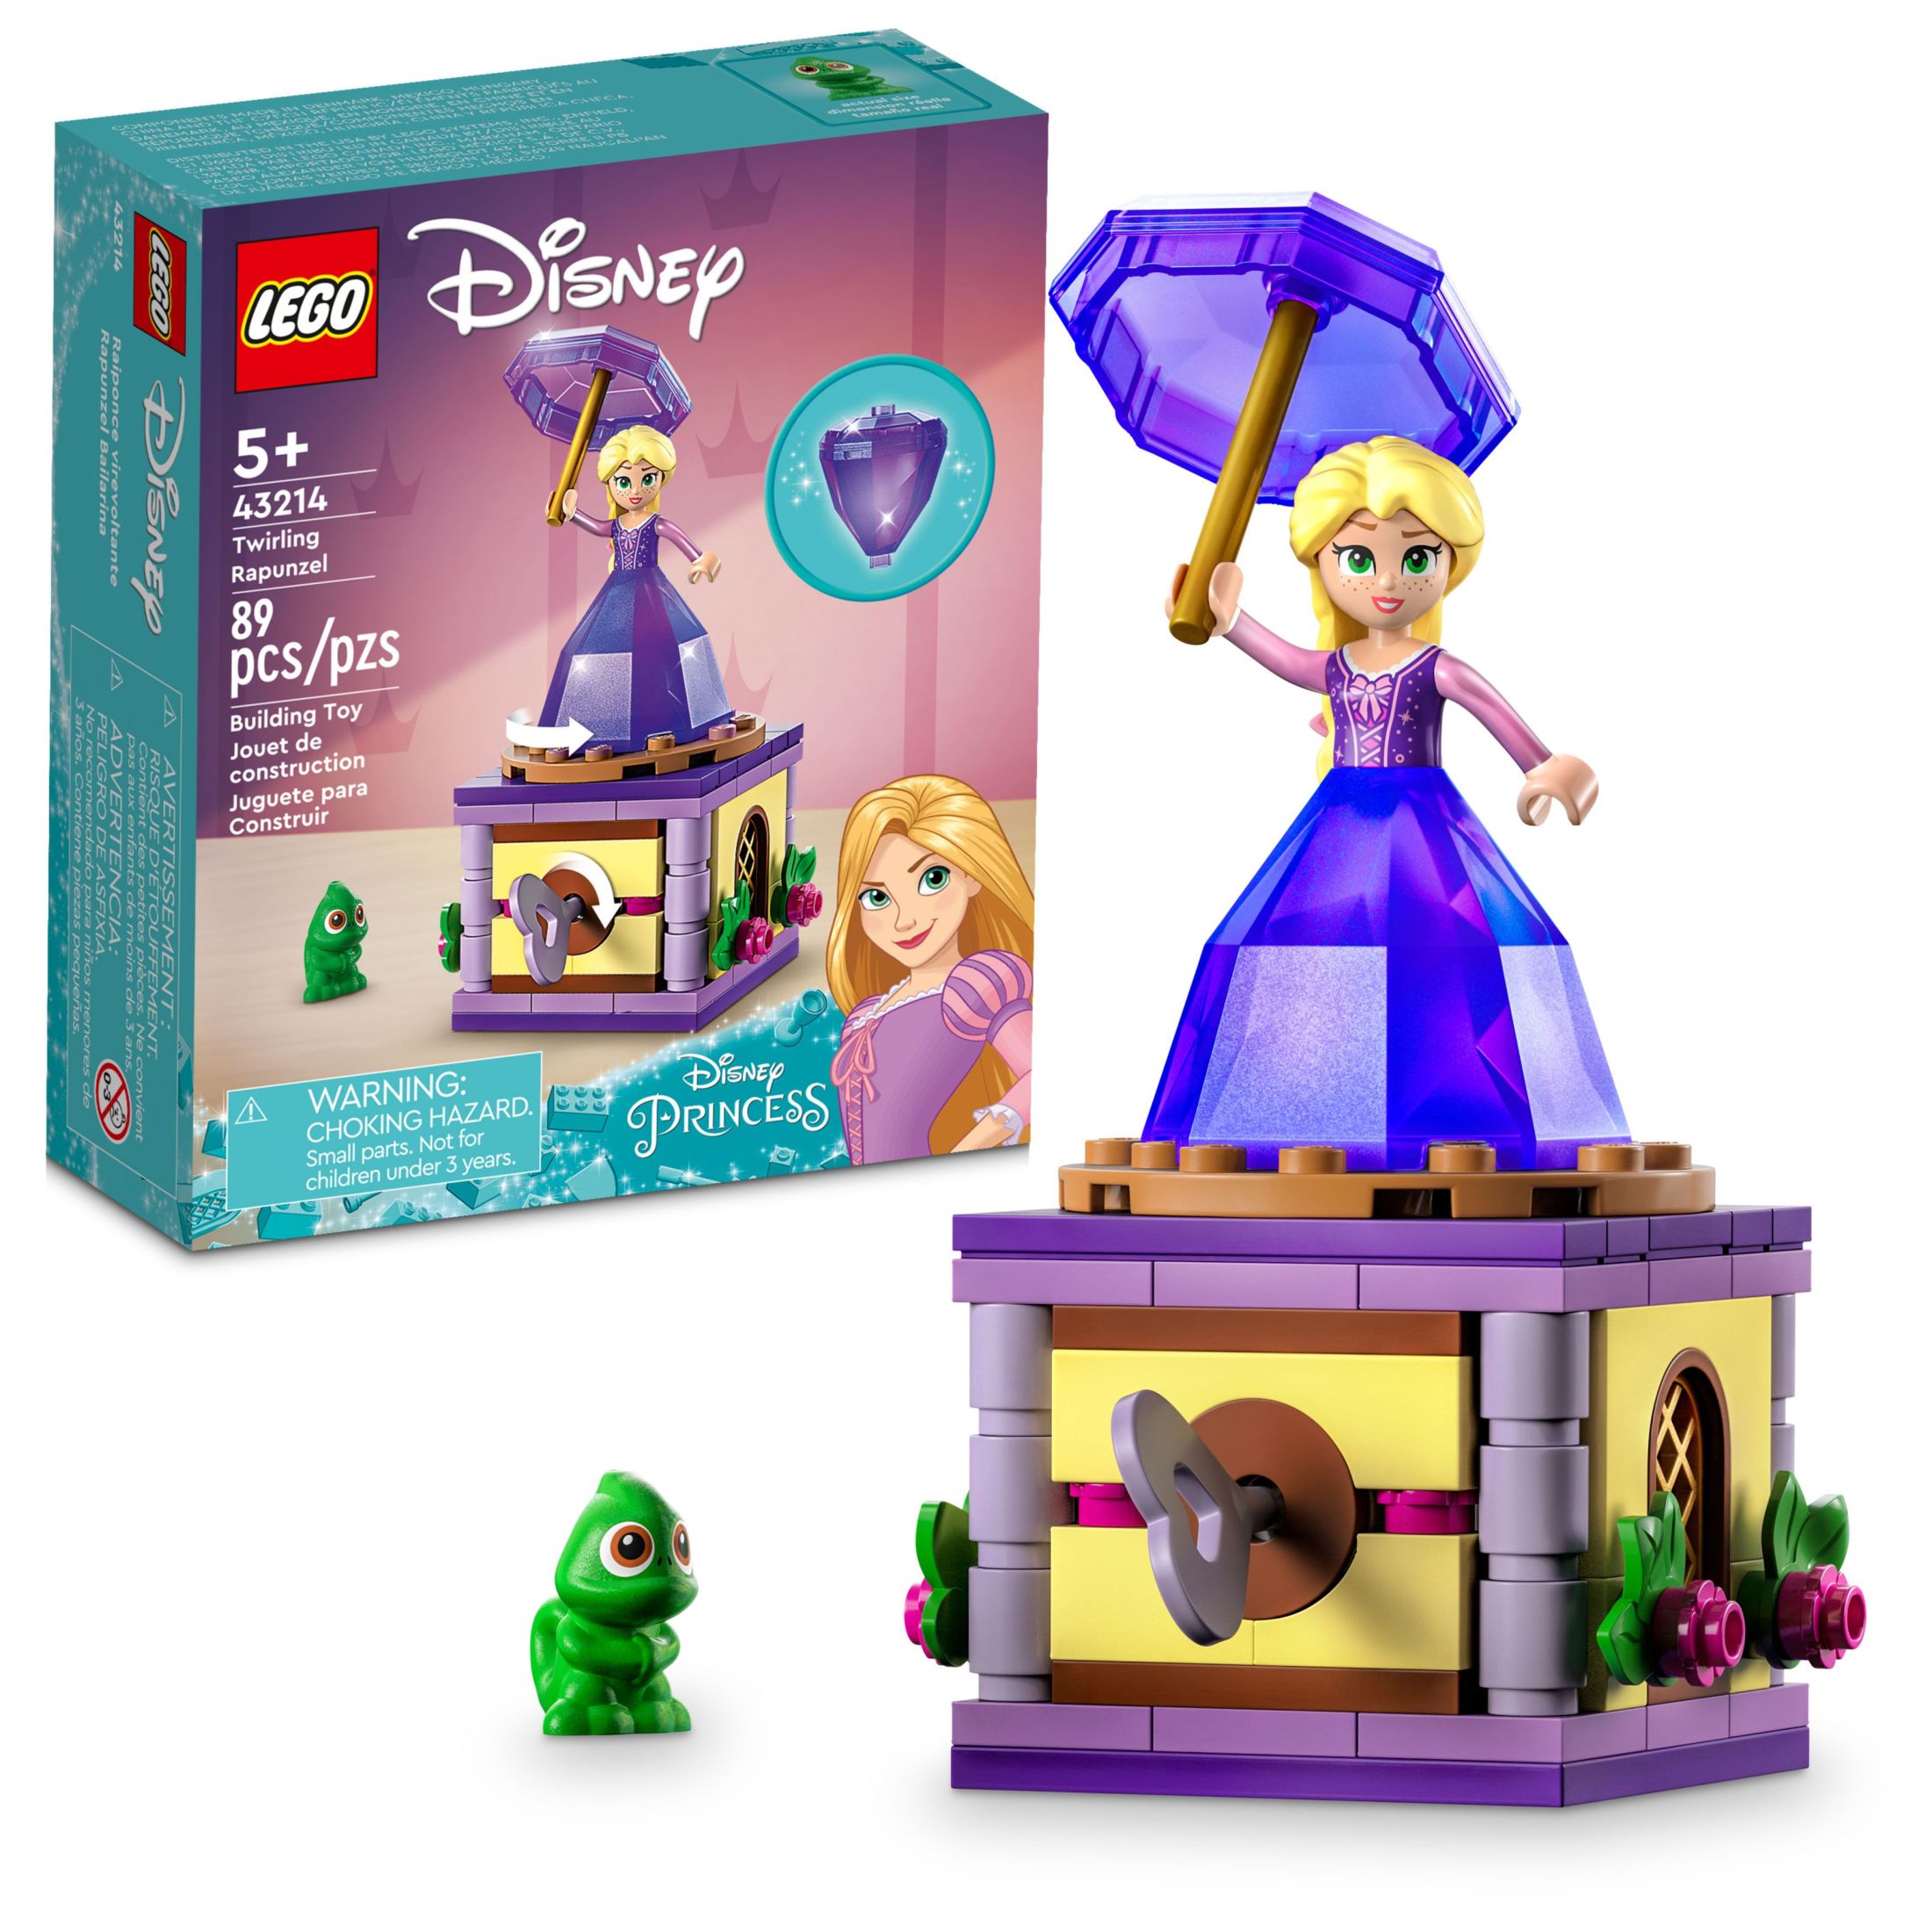 LEGO Disney Princess Twirling Rapunzel Building Toy 43214, with Diamond Dress Mini-Doll and Pascal The Chameleon Figure, Wind Up Toy Rapunzel, Disney Collectible Toy for Girls & Boys Age 5+ Years Old - image 1 of 8